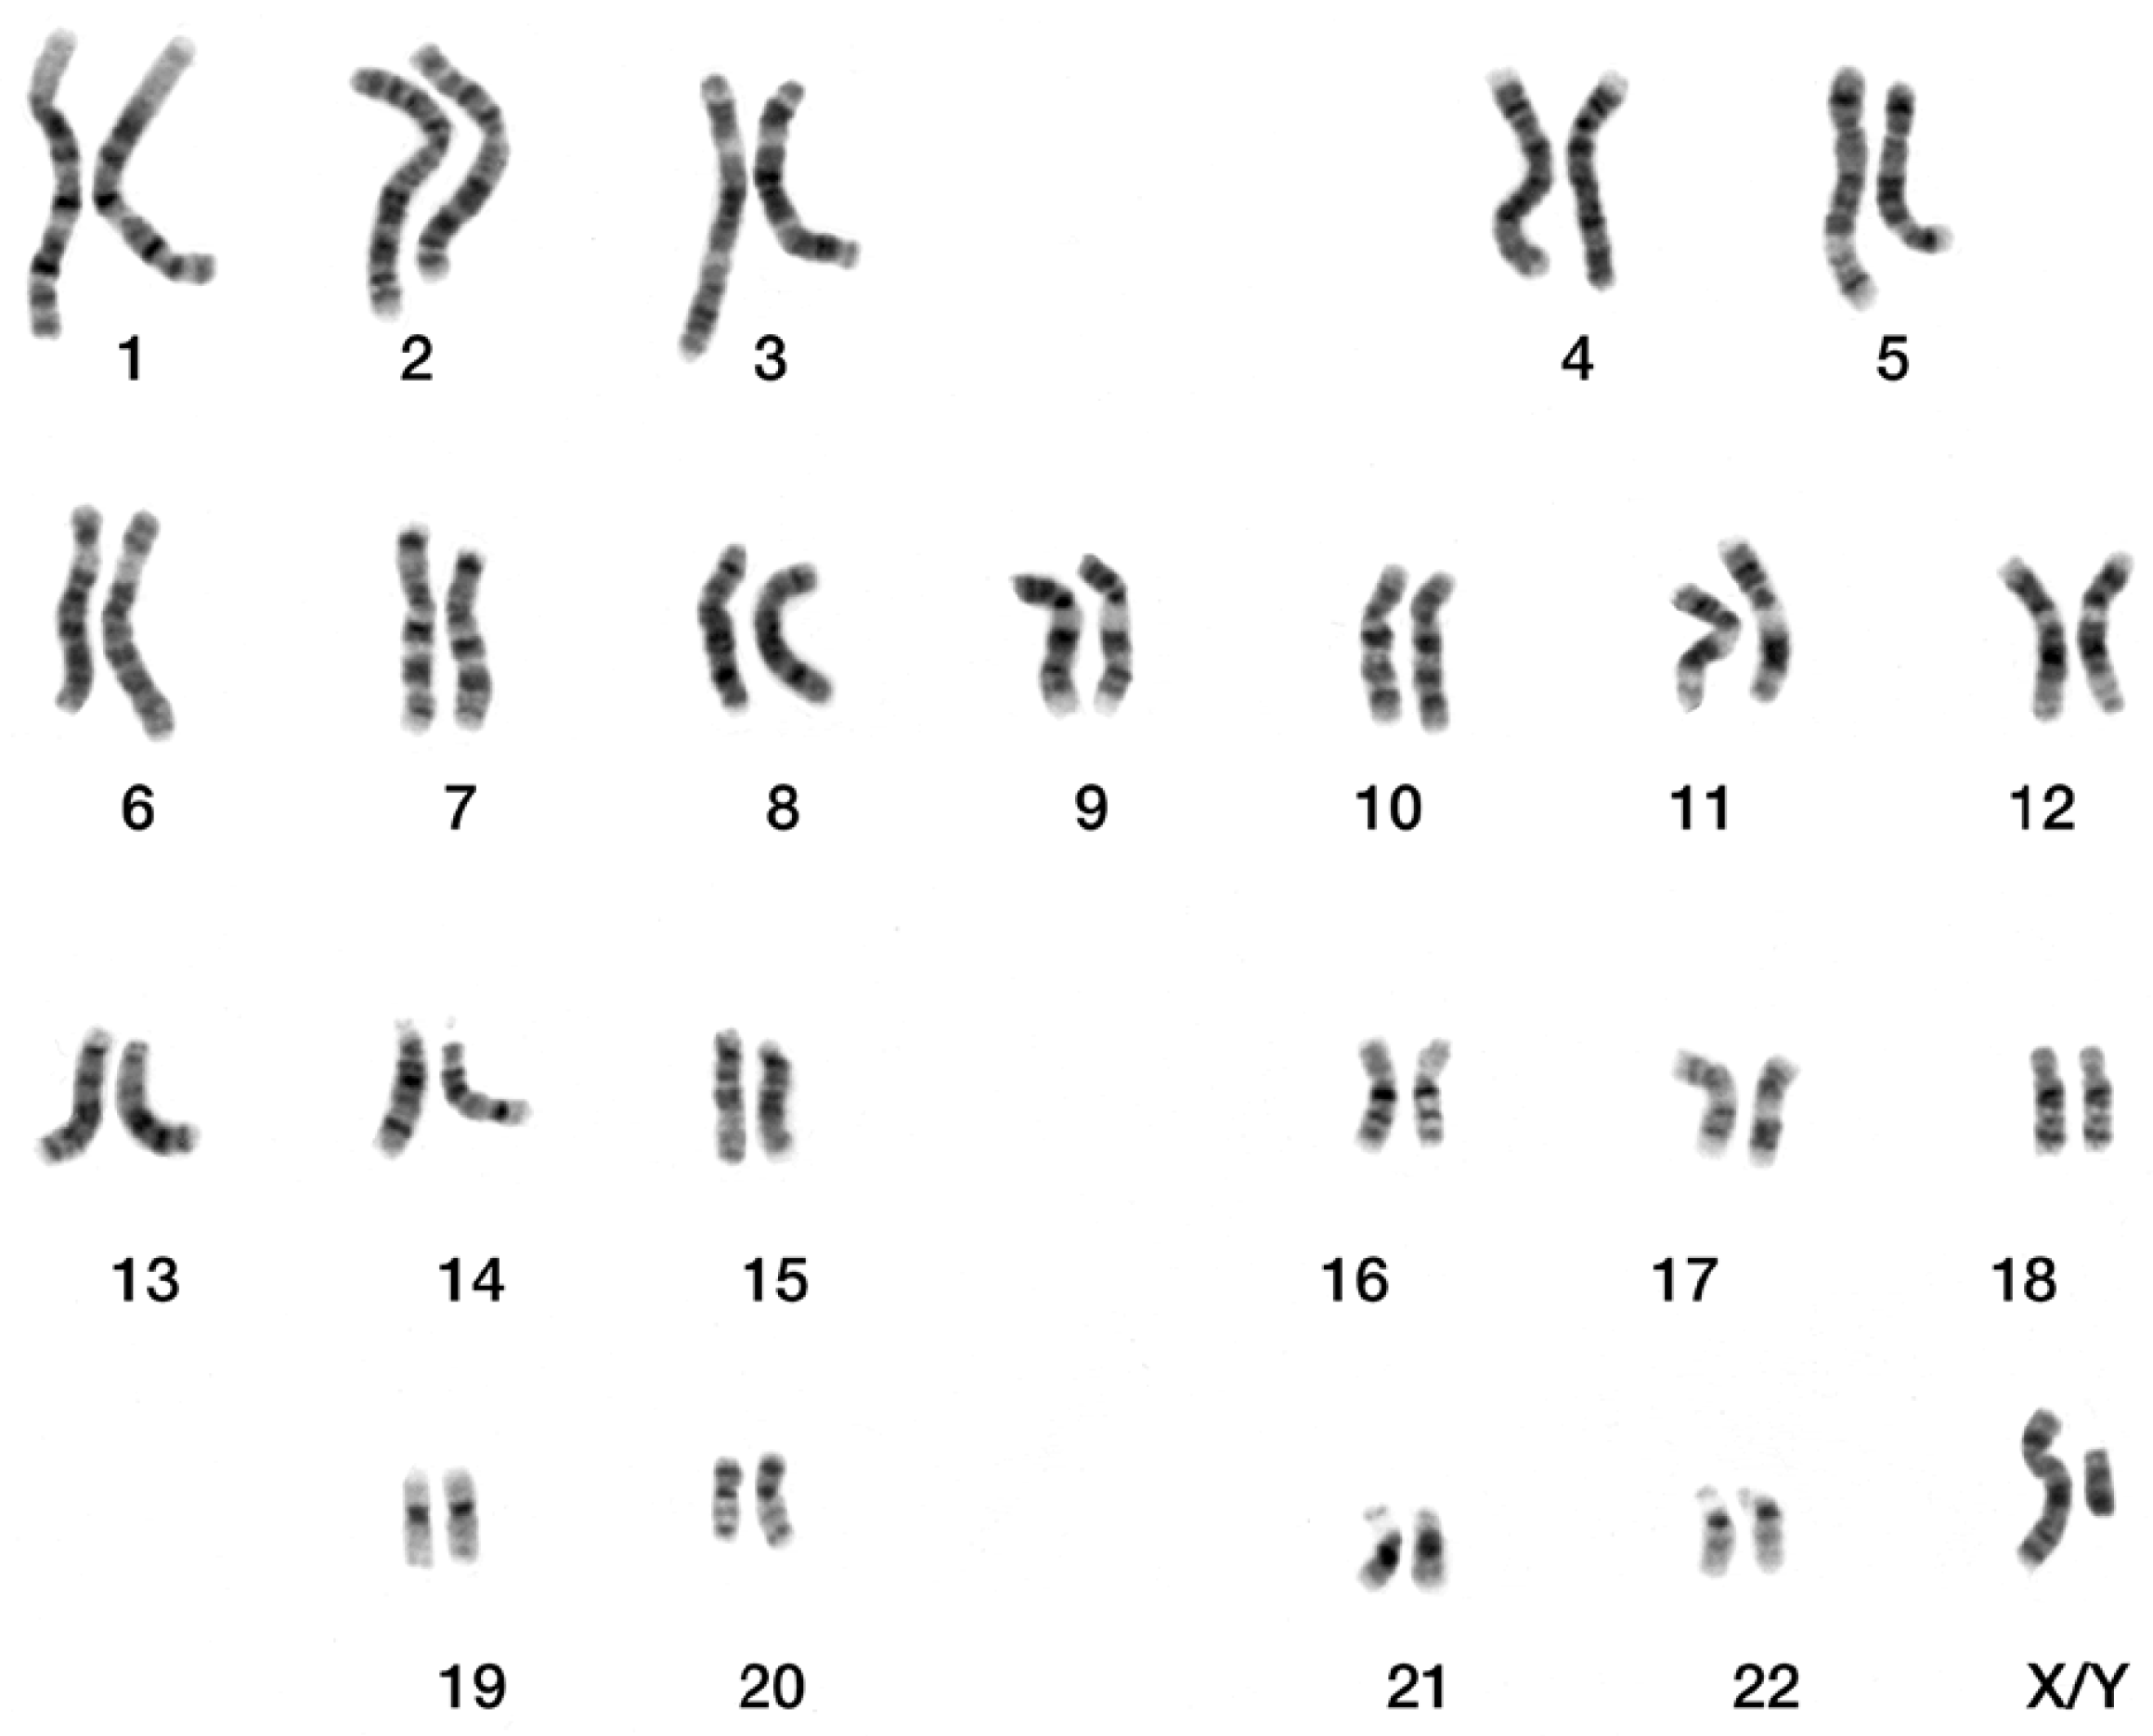 Ancestry blocks for canine chromosome 6. Each horizontal band is an